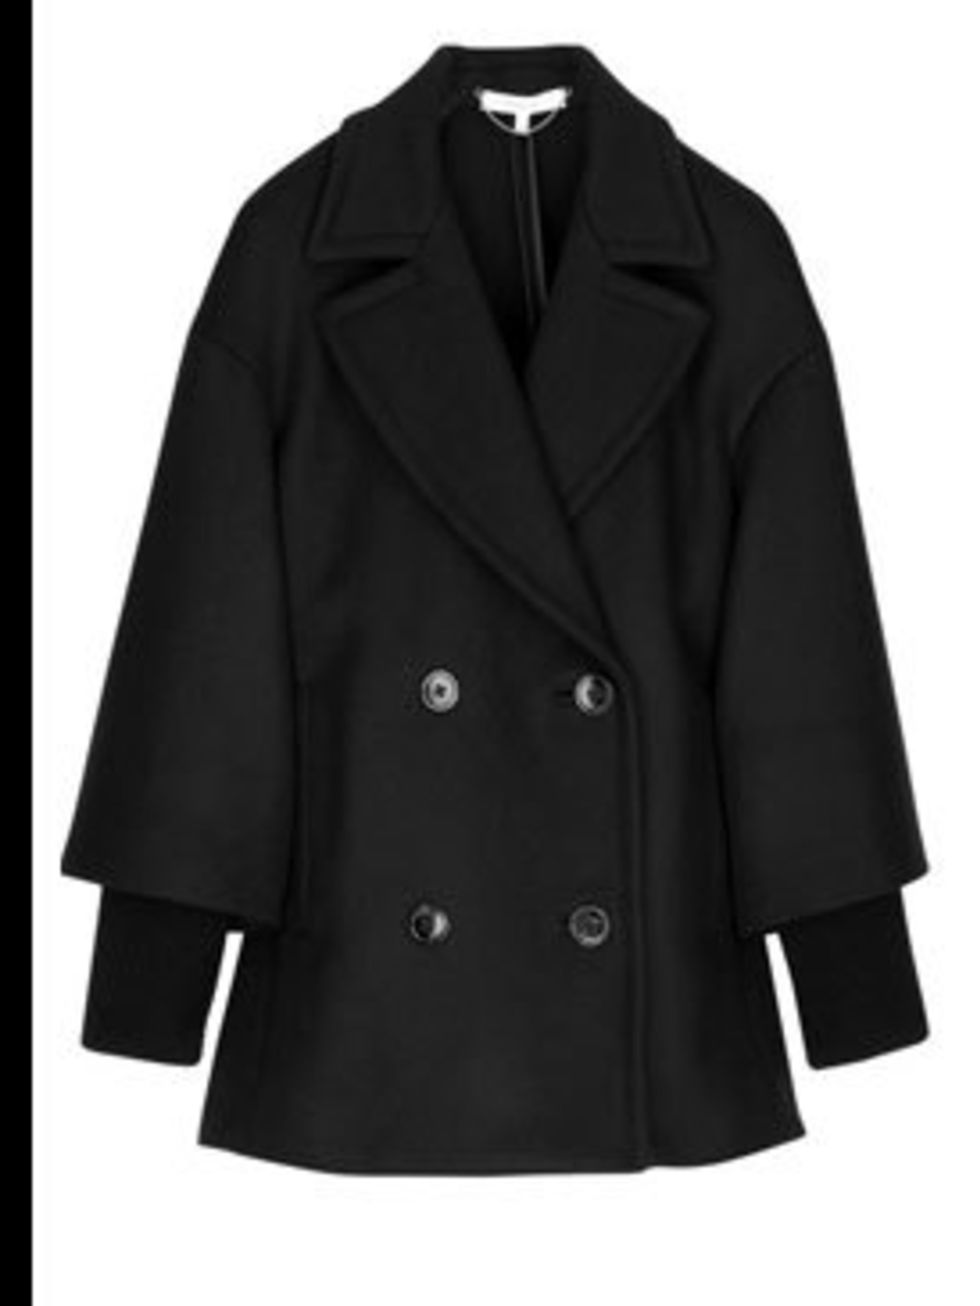 <p>Black coat, £465, by Vanessa Bruno at <a href="http://www.net-a-porter.com/product/46218">Net-a-Porter</a></p>